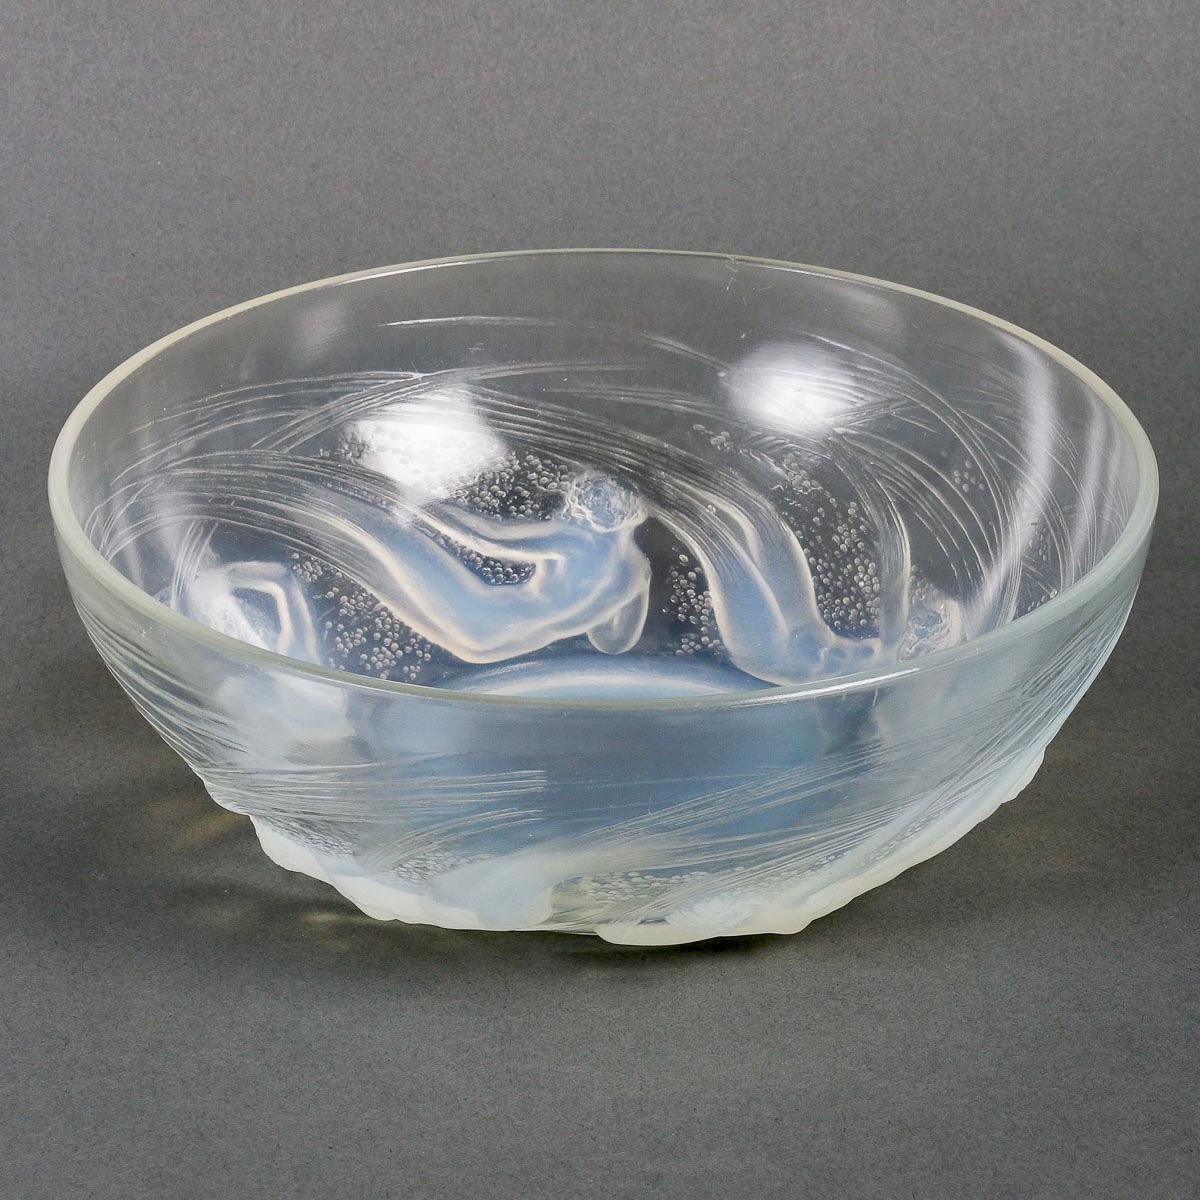 Blown Glass 1921 René Lalique Dishes Plate & Bowl Ondines Opalescent Glass Mermaids For Sale